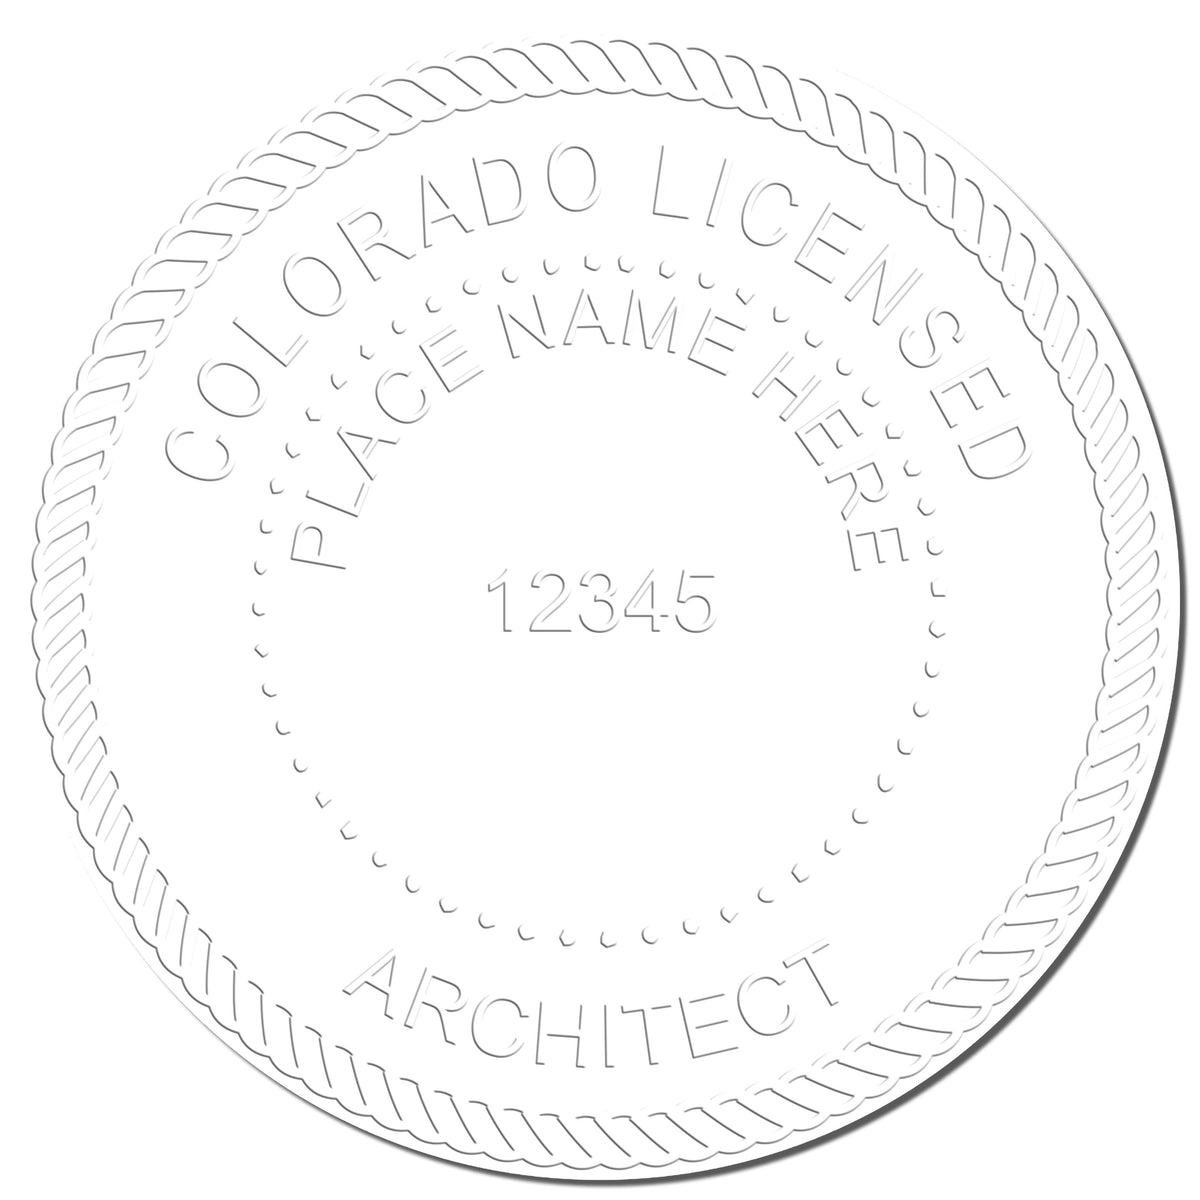 A photograph of the Handheld Colorado Architect Seal Embosser stamp impression reveals a vivid, professional image of the on paper.